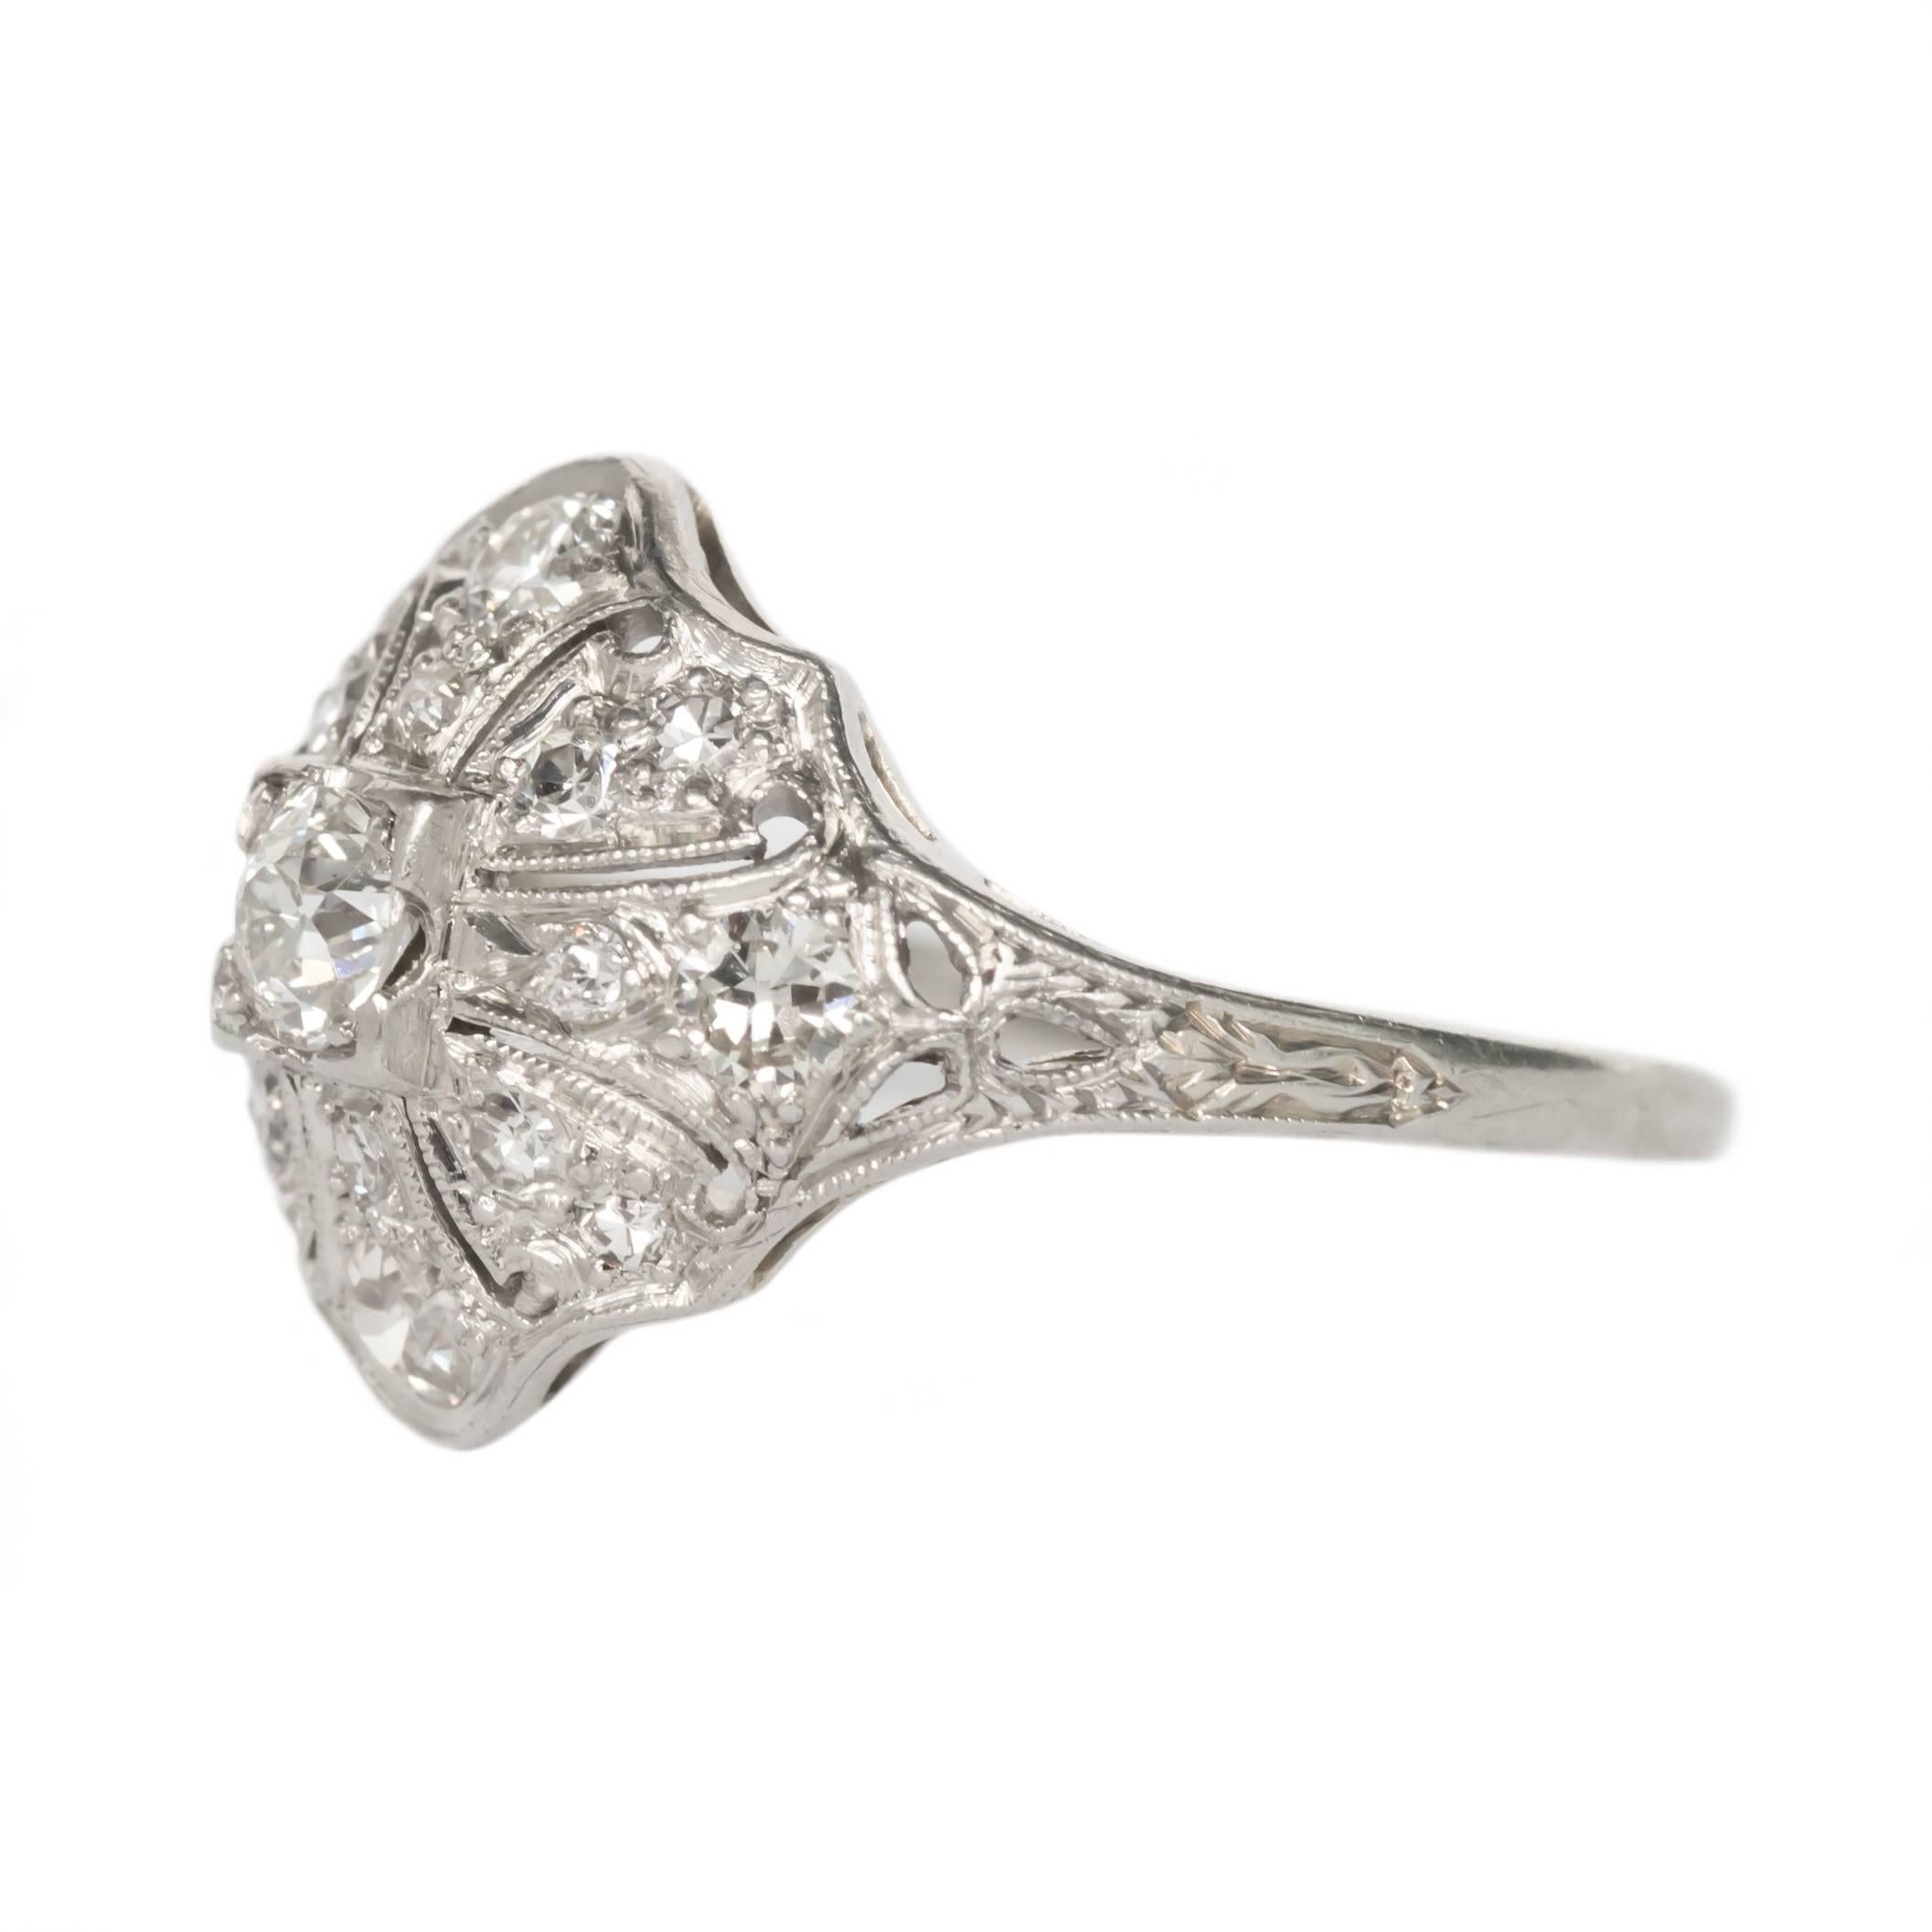 Item Details: 
Ring Size: 6.20
Metal Type: Platinum 
Weight: 3.6 grams

Stone Details:
Shape: Antique Single Cut 
Carat Weight: .40 Carat Total Weight
Color: F
Clarity: SI

Finger to Top of Stone Measurement: 5.10mm